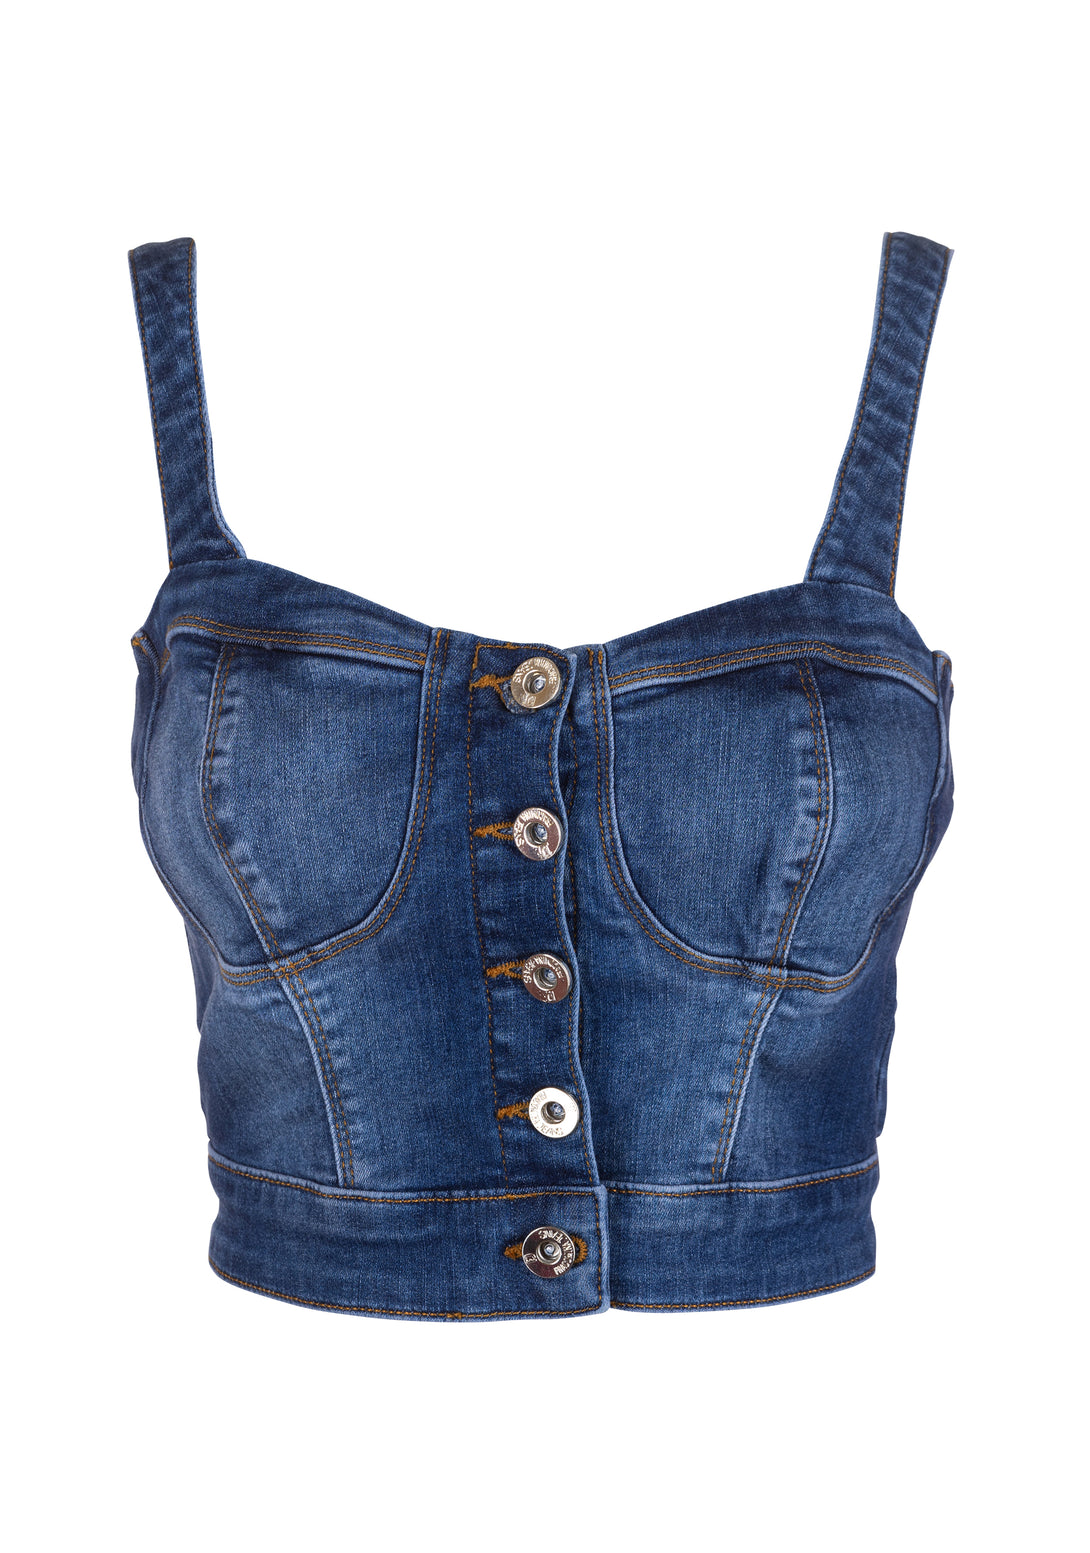 Tank top made in denim with middle wash